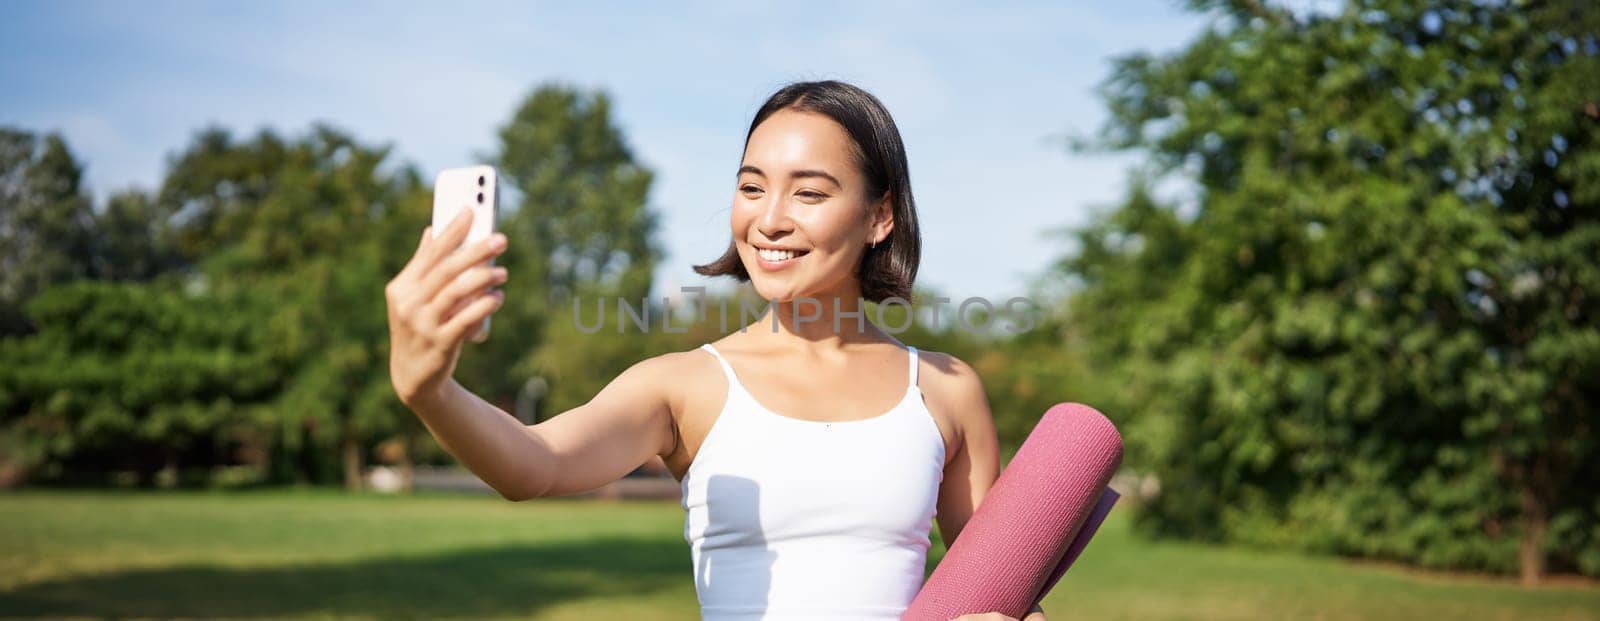 Sporty fitness girl takes selfie with rubber yoga mat in park, does workout and shares photos on social media.